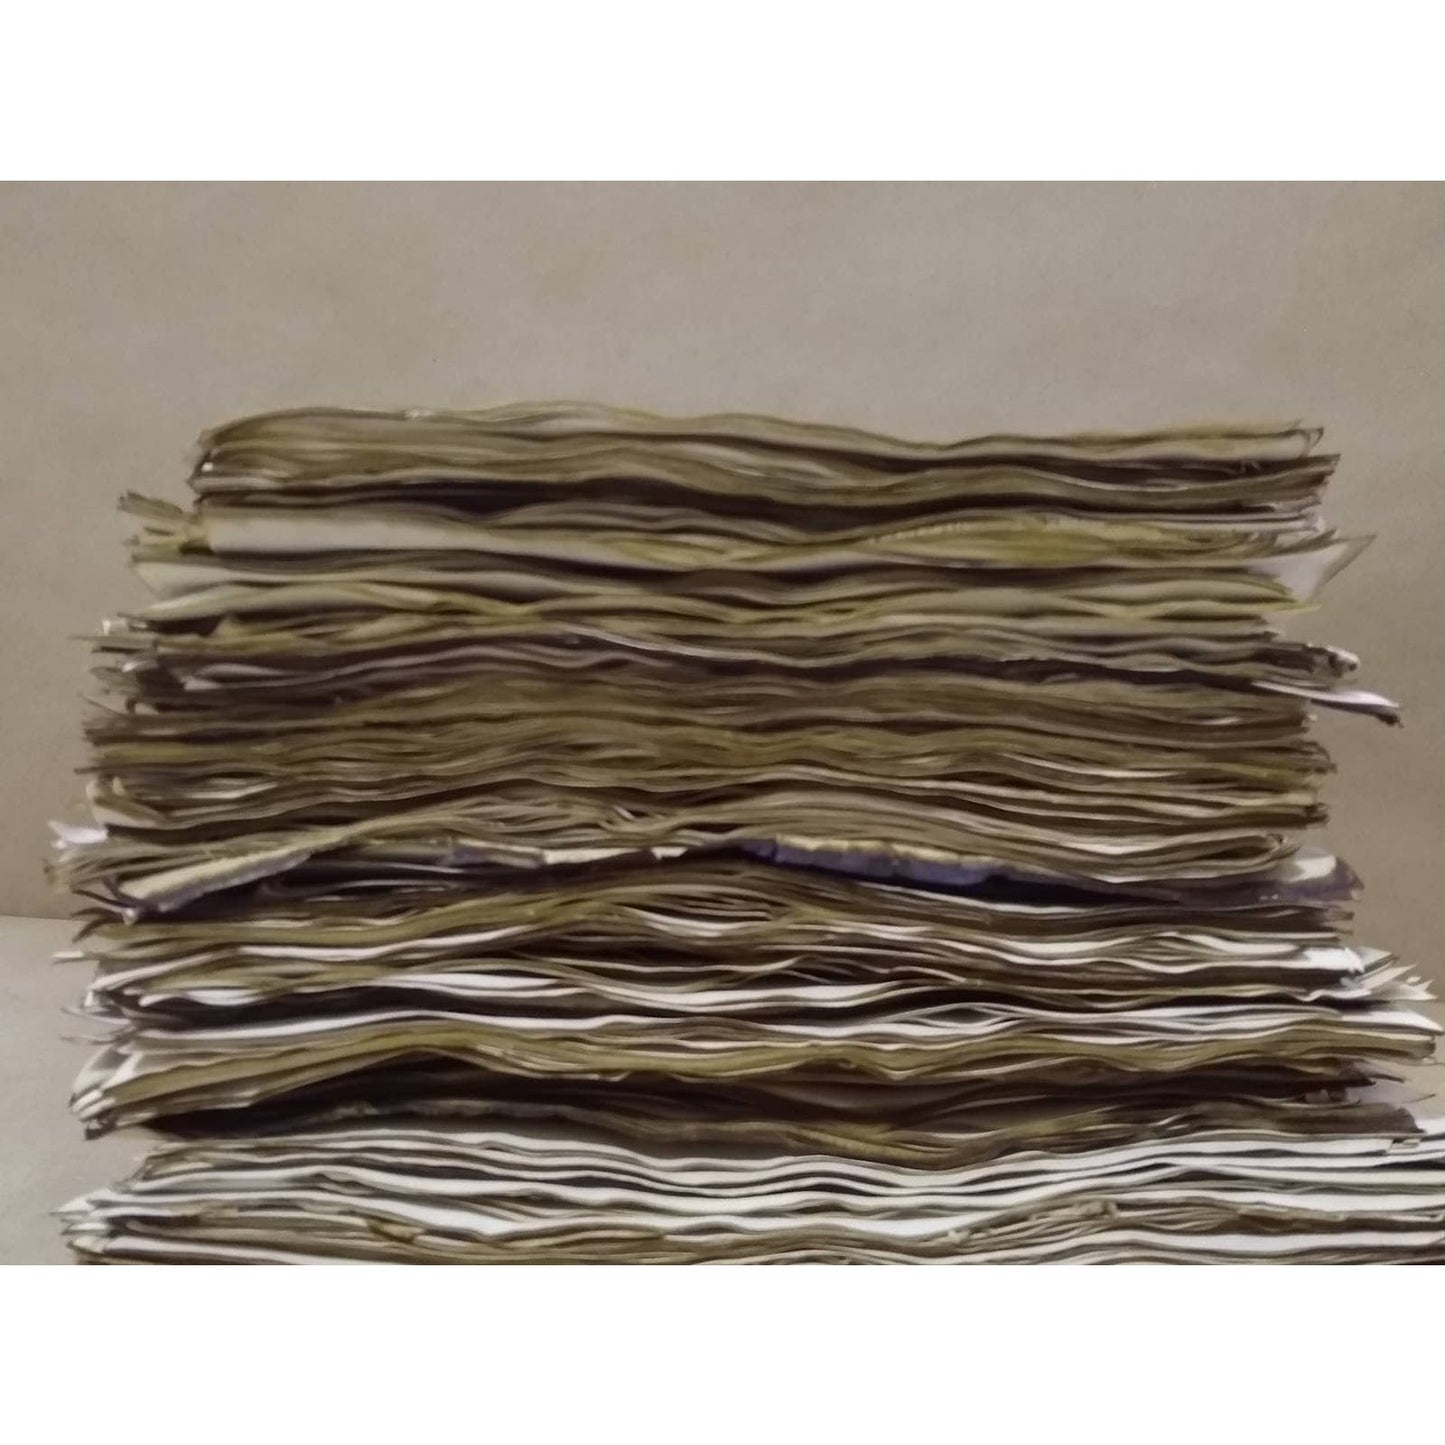 100 Coffee Dyed 8.5"x14" Papers, Hand Dyed Papers, Junk Journal Supply